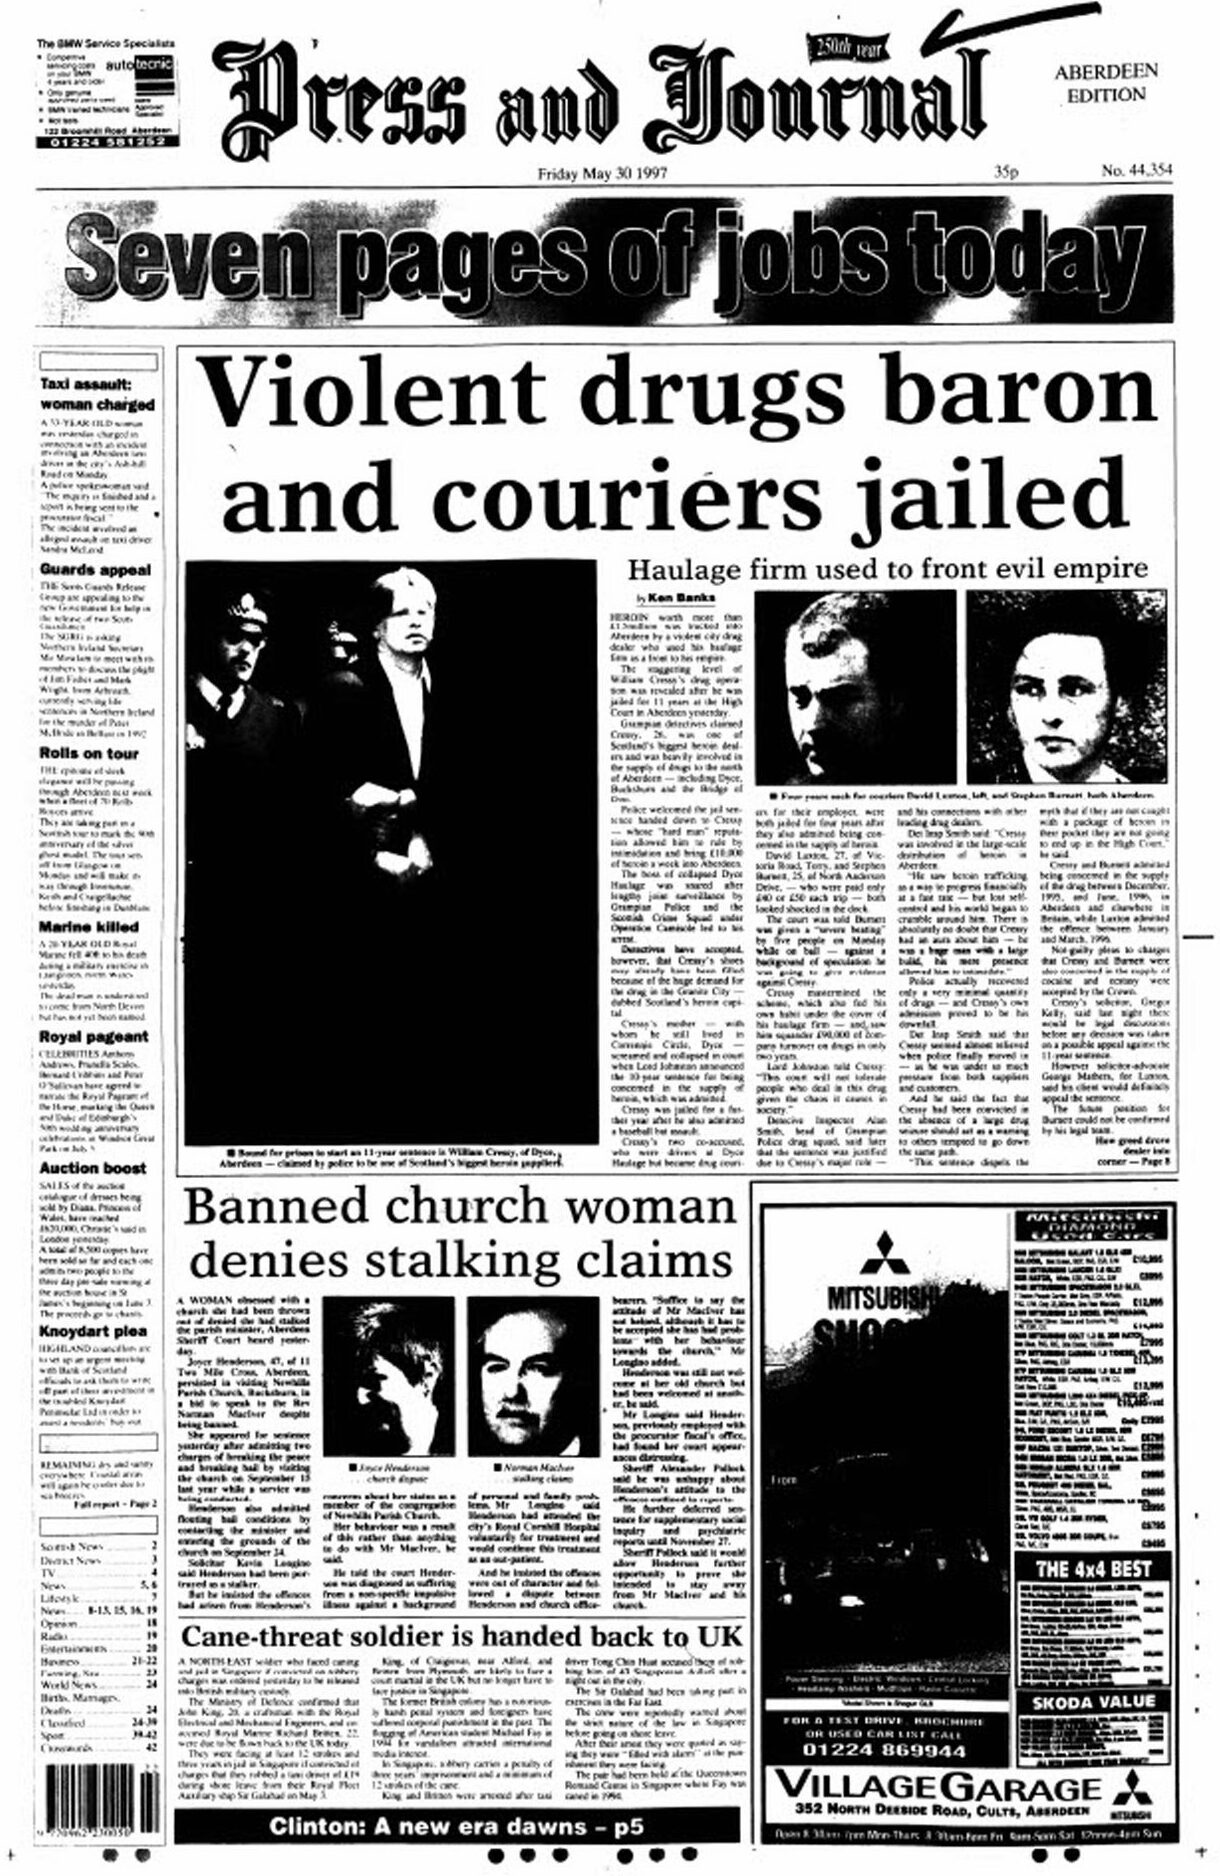 Press and Journal front page "violent drugs baron and couriers jailed.